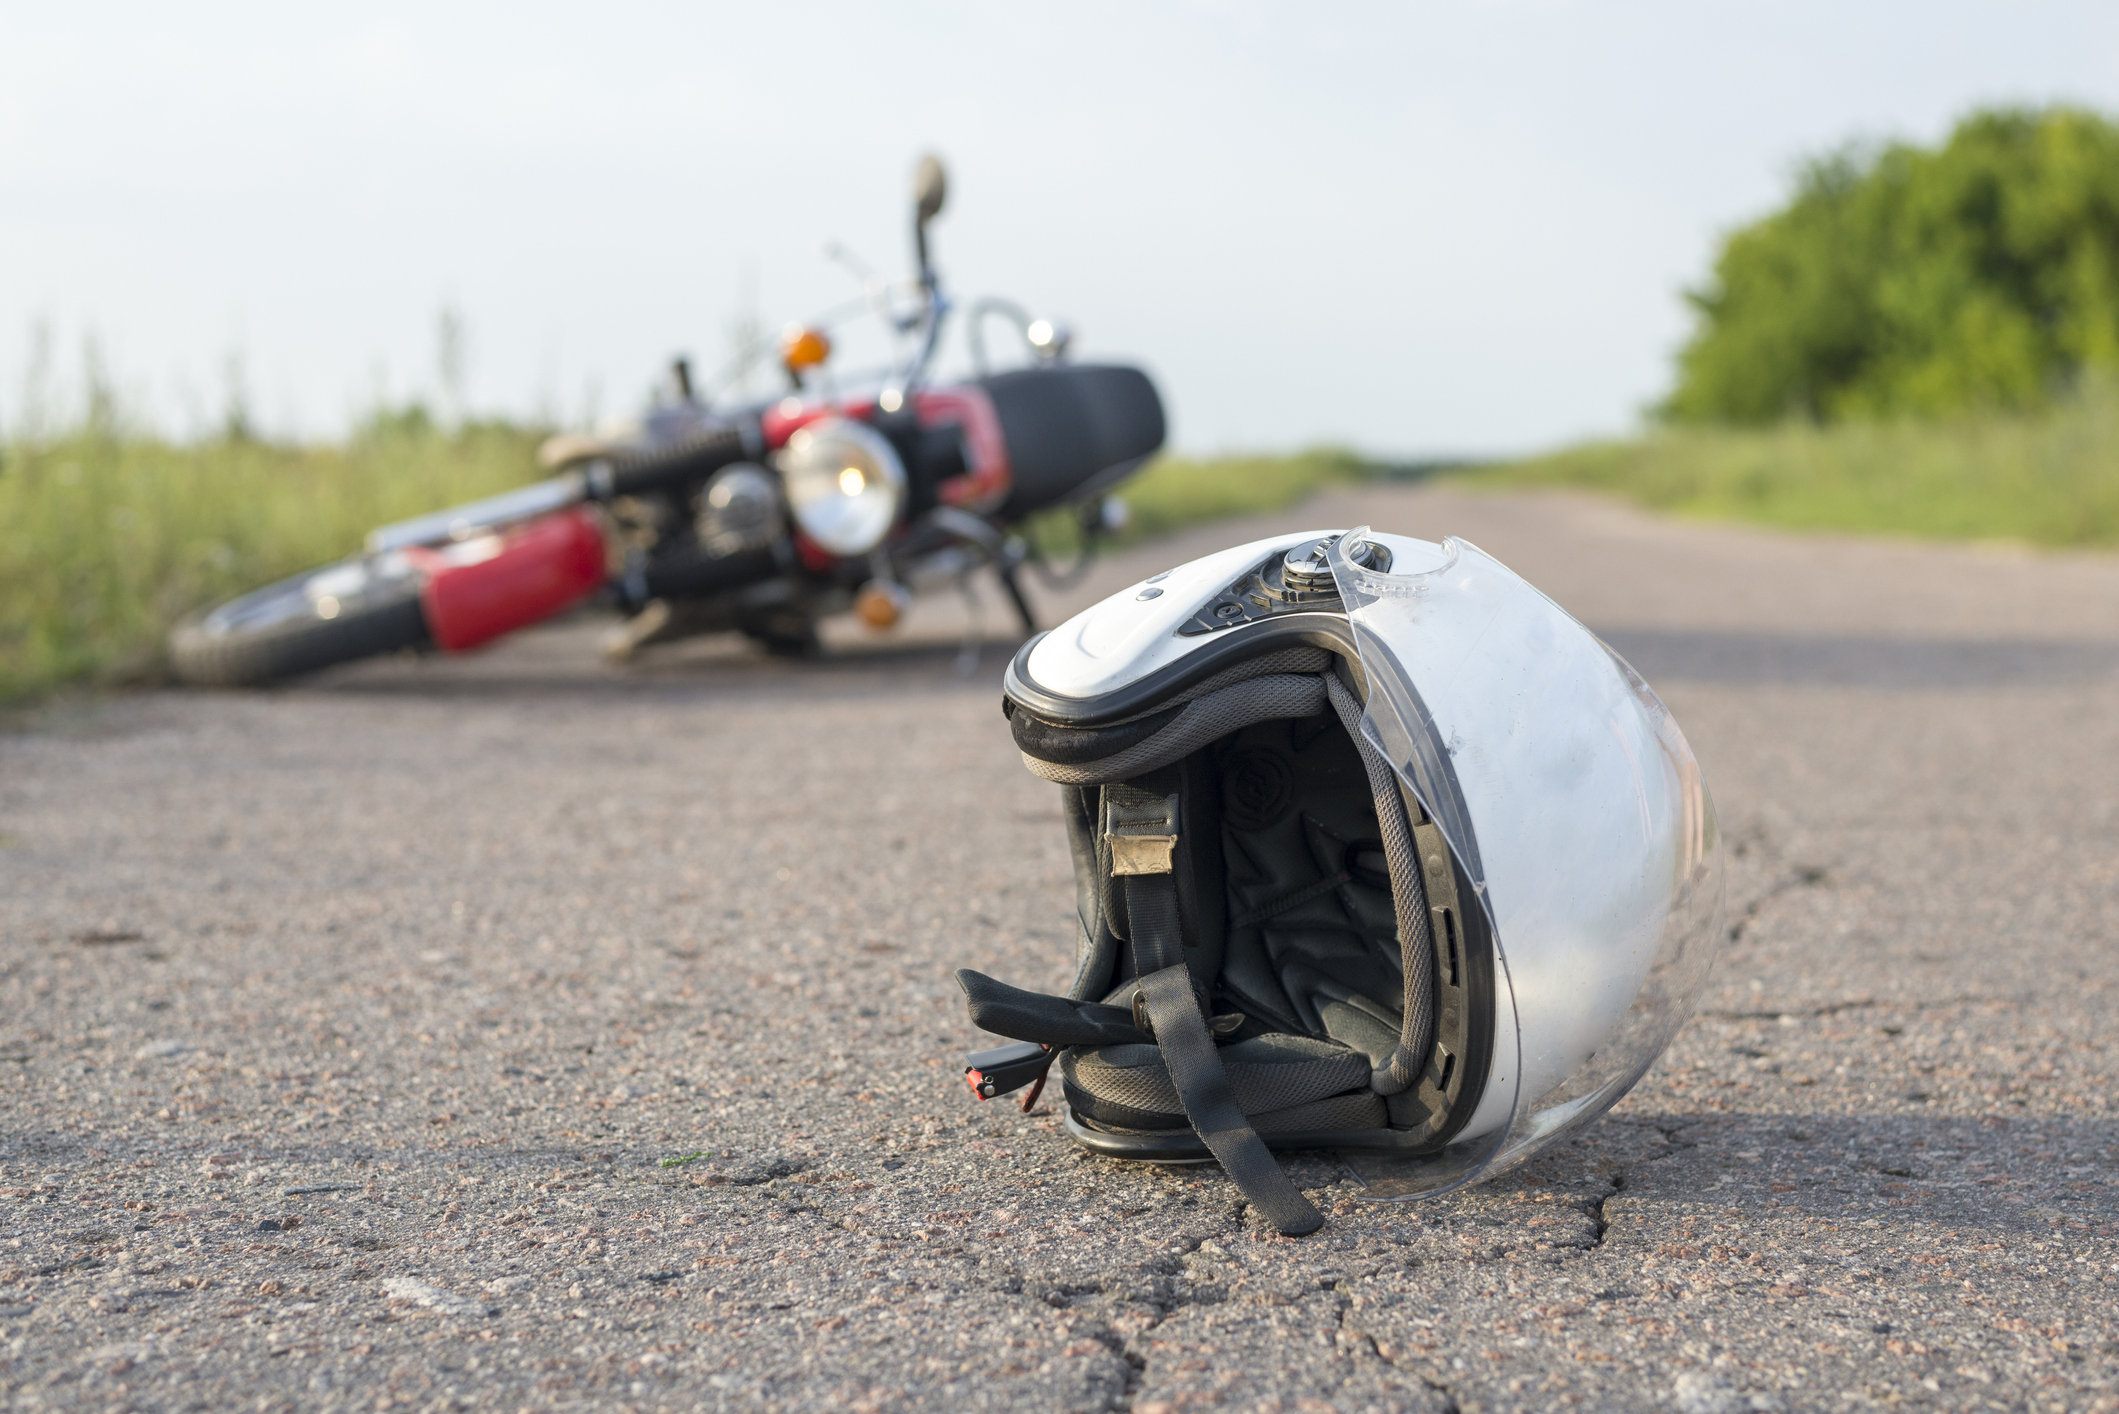 Steps To Take After a Motorcycle Accident